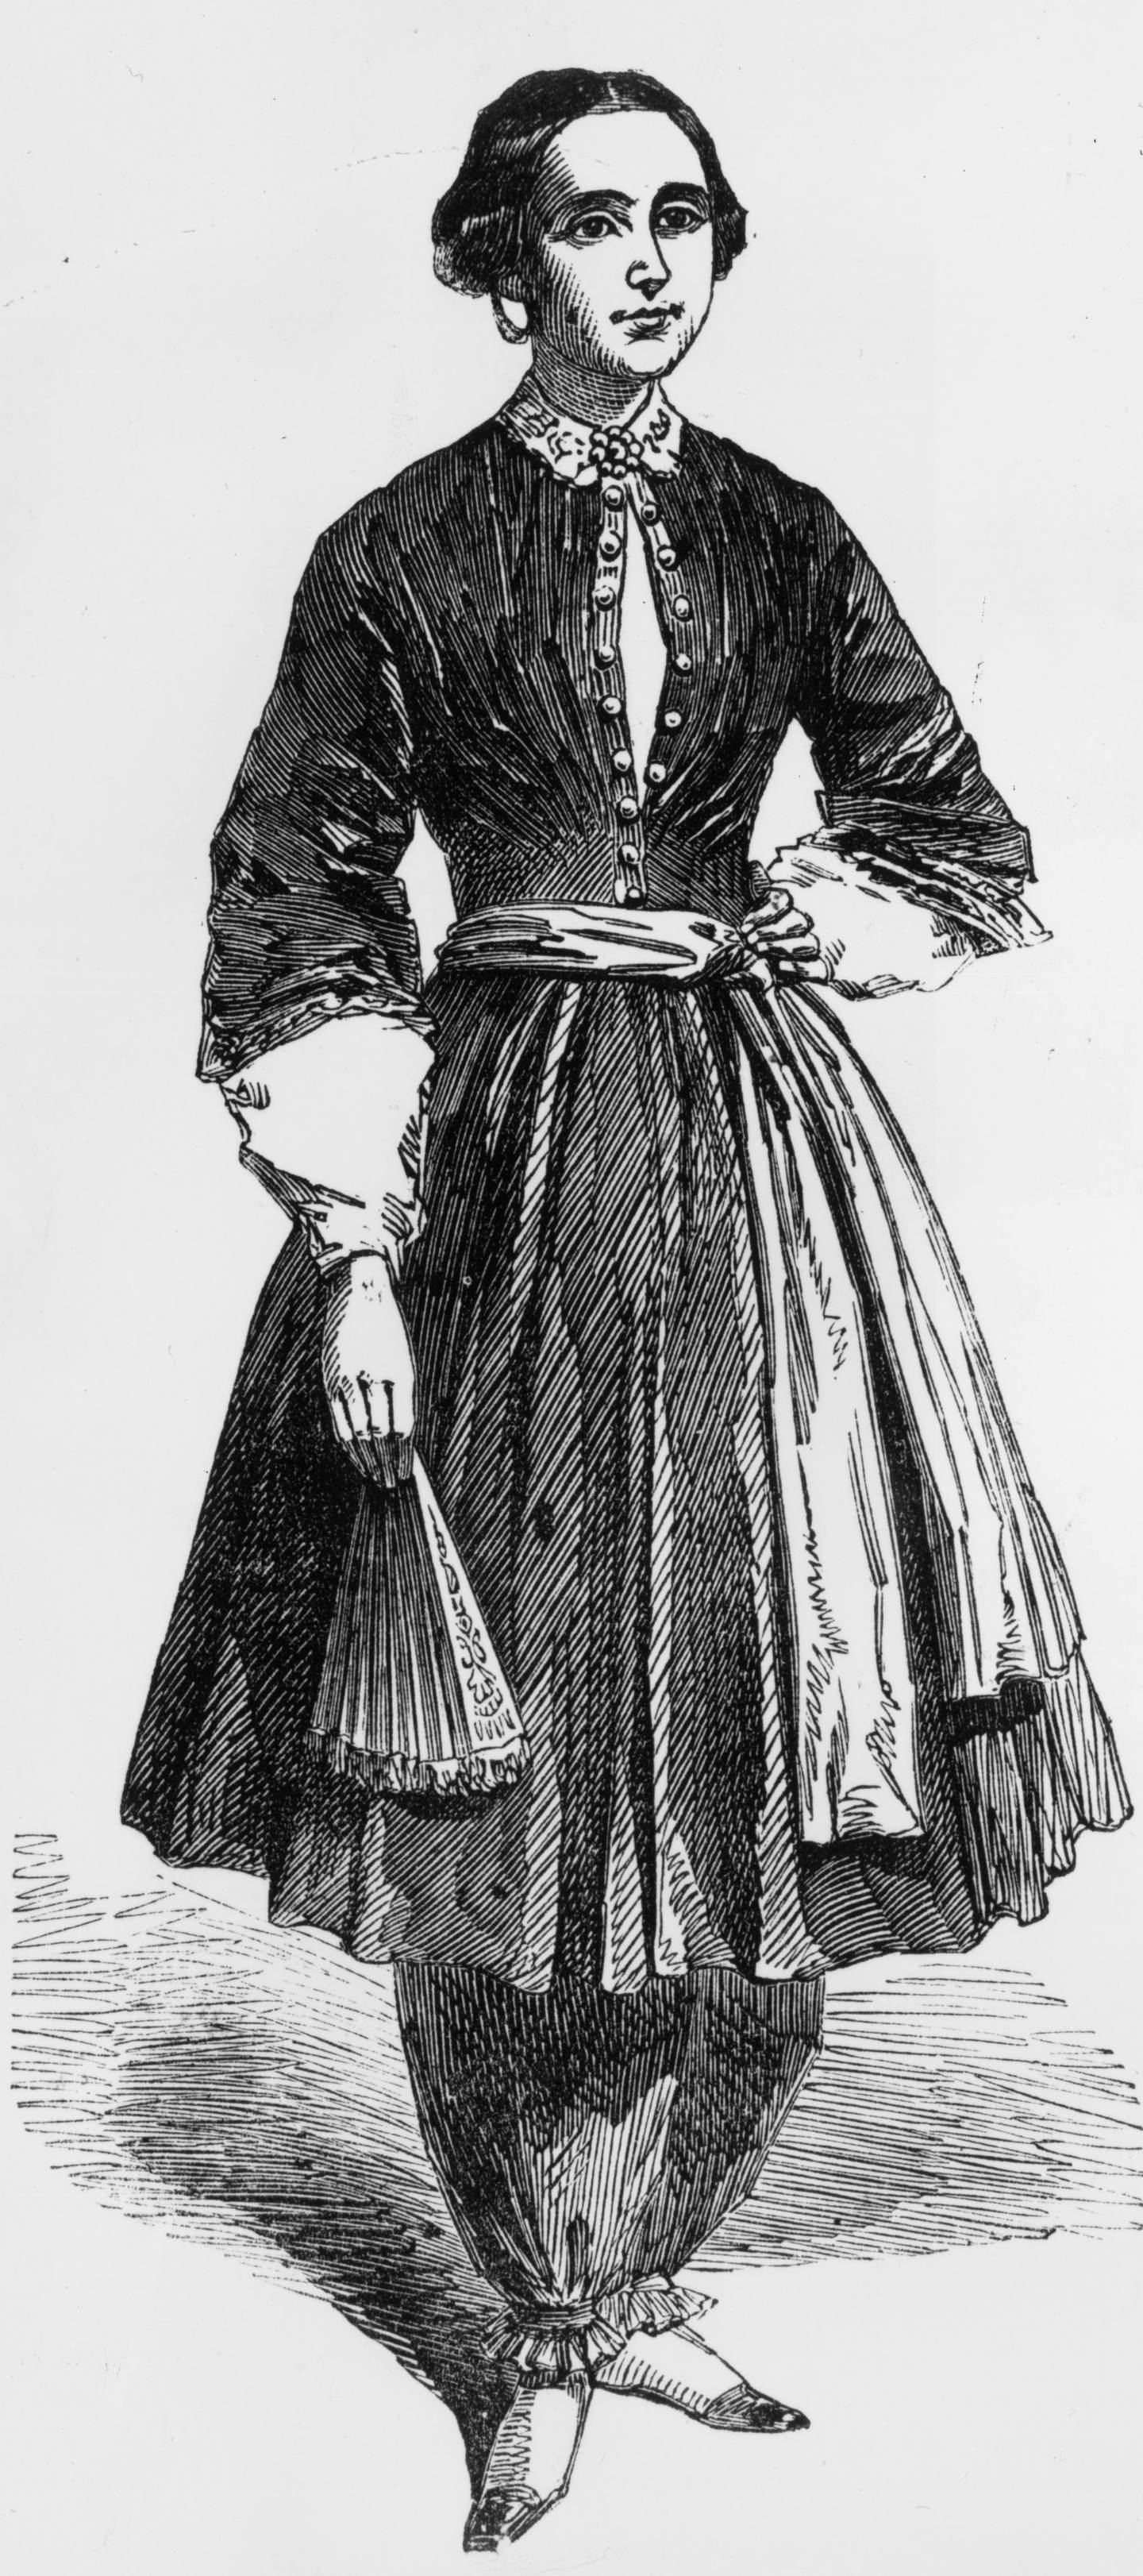 Amelia Bloomer, a champion of women's rights and dress reform, wearing the 'trousers' she designed, which were called bloomers, circa 1855. Getty Images 